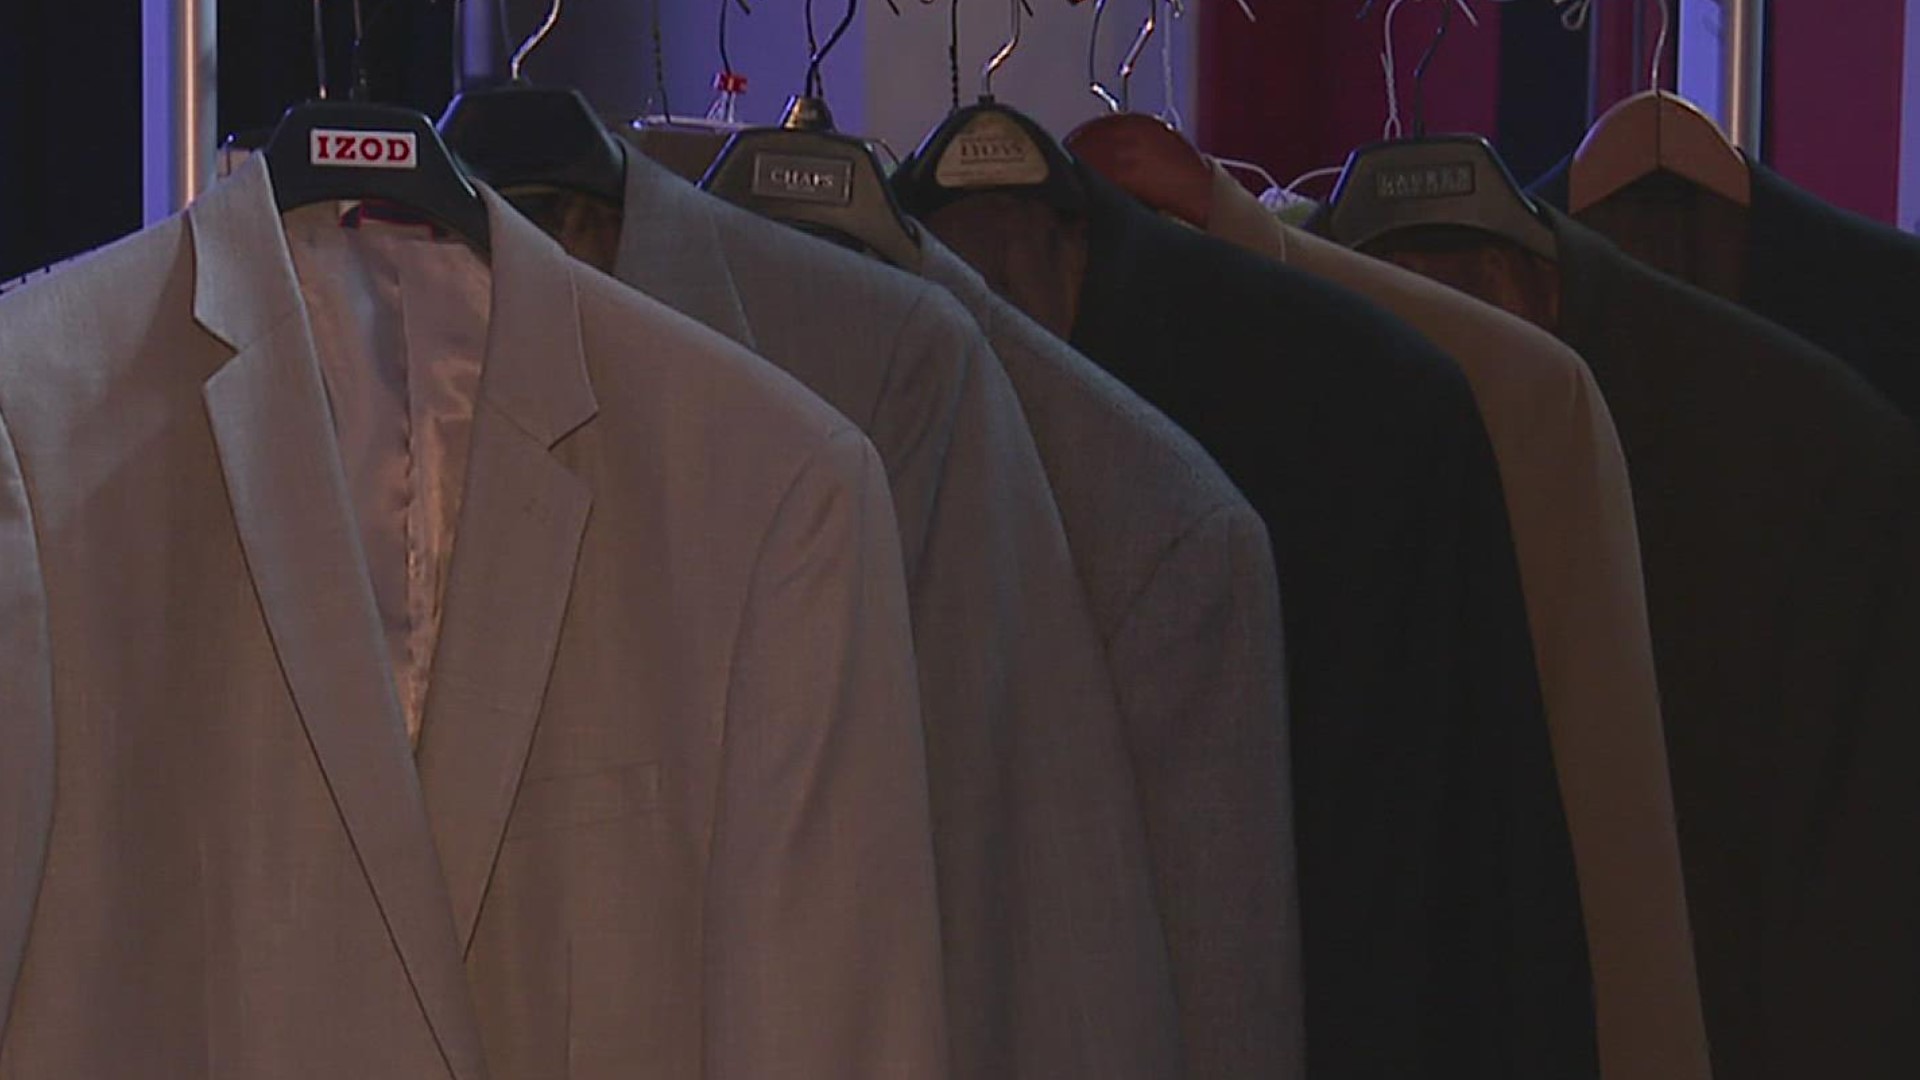 The show highlighted donated items that are up for grabs in the school's dress closet program, which is a free on-campus clothing shop.